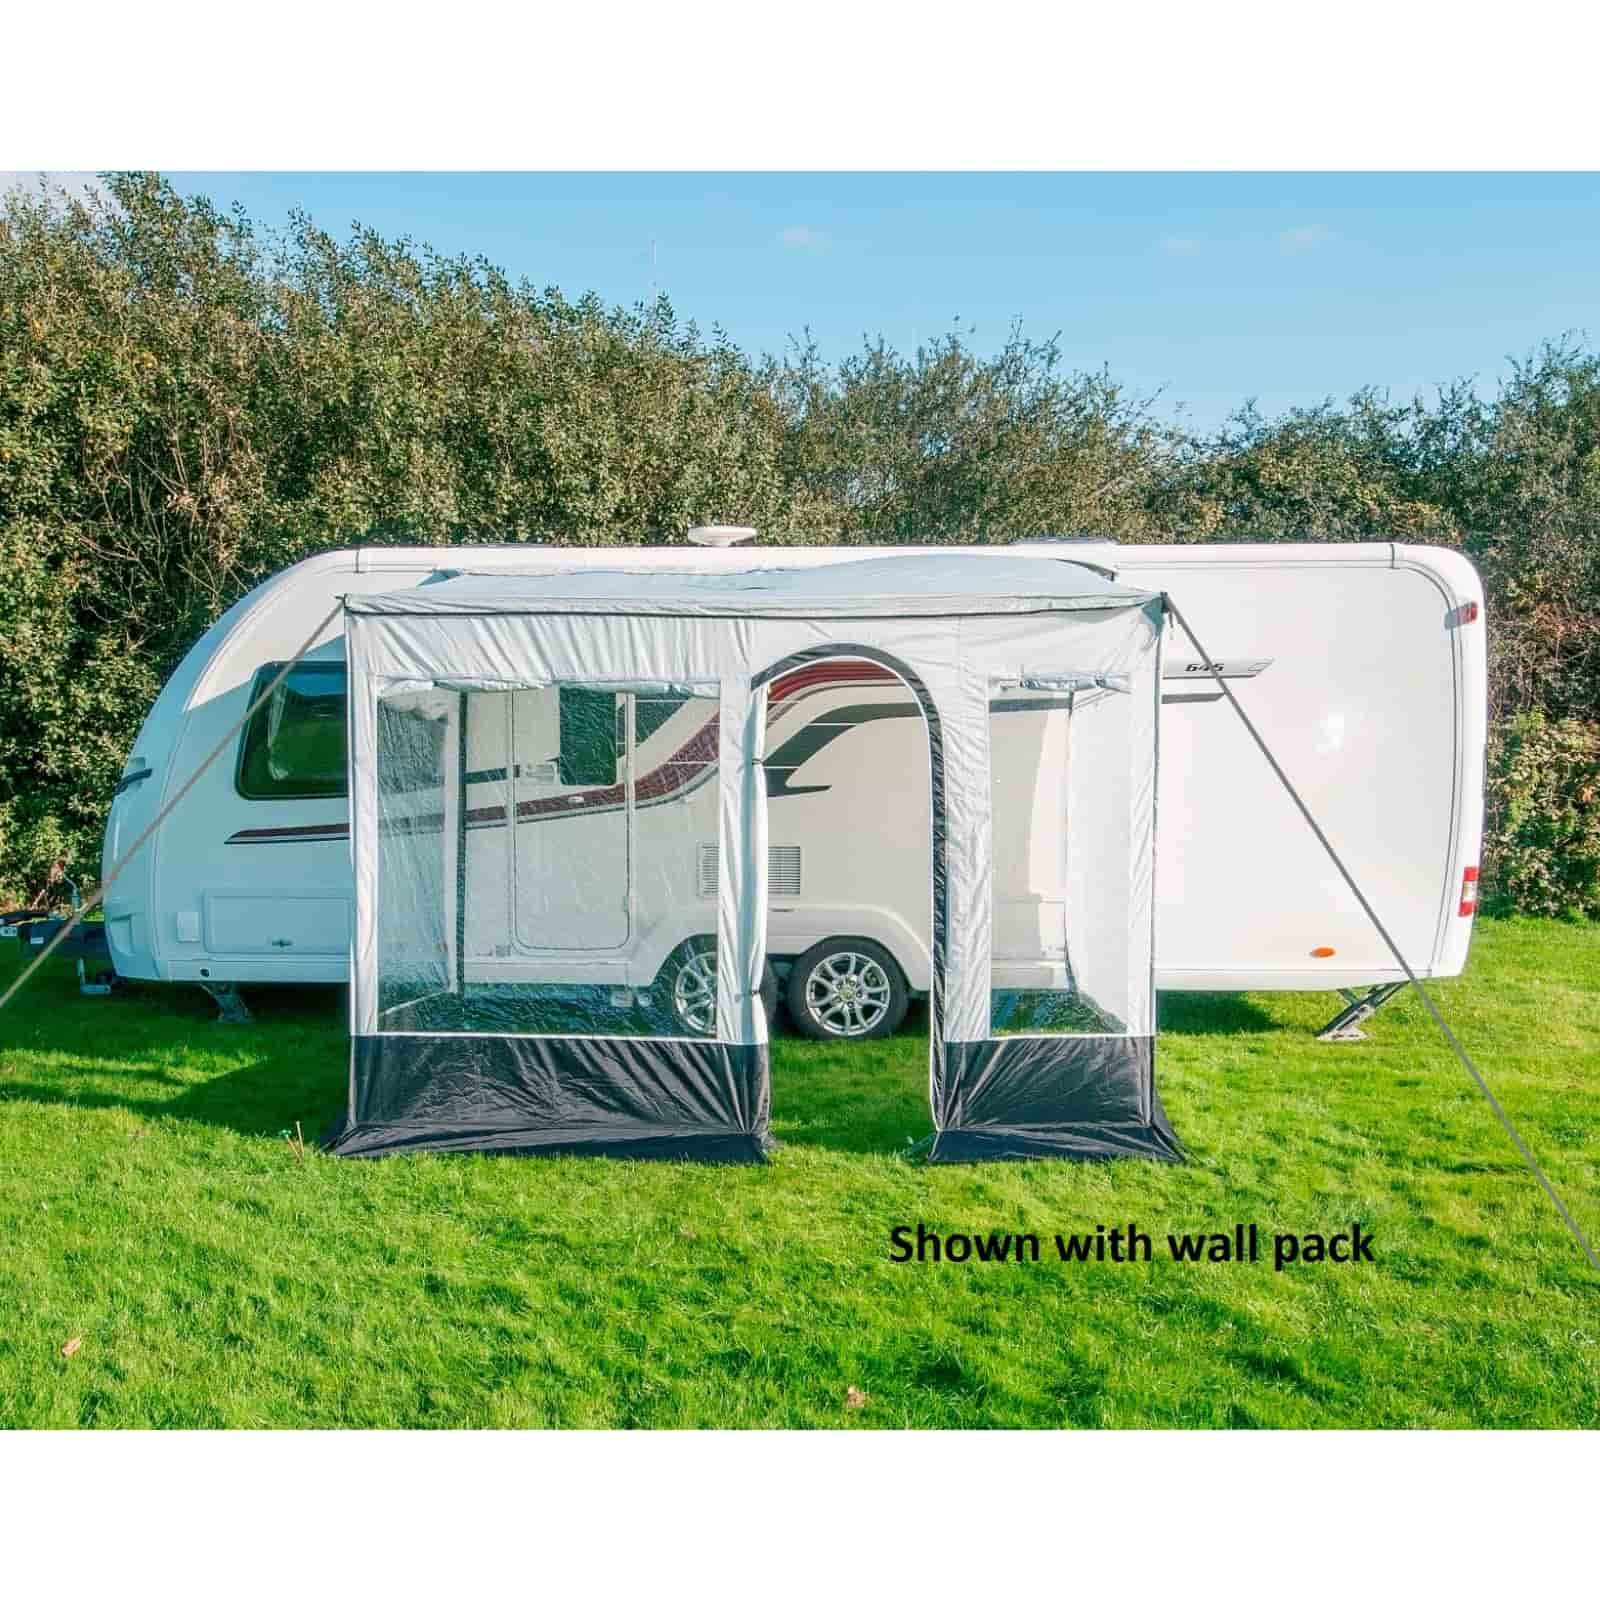 Sunncamp Protekta 13 Wall Pack for Awning Canopy - Quality Caravan Awnings